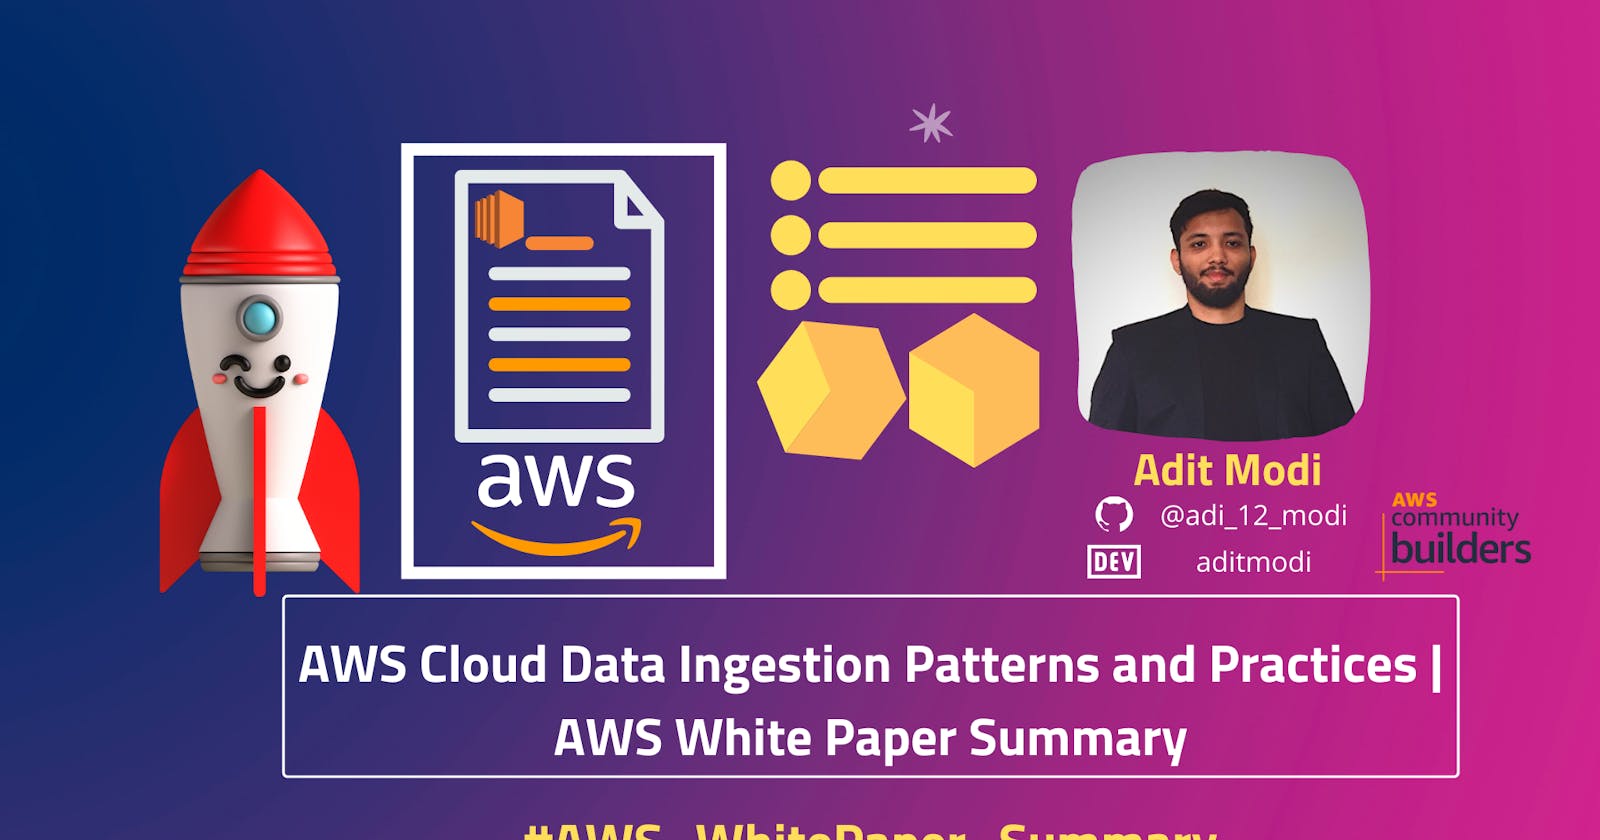 AWS Cloud Data Ingestion
Patterns and Practices | AWS White Paper Summary